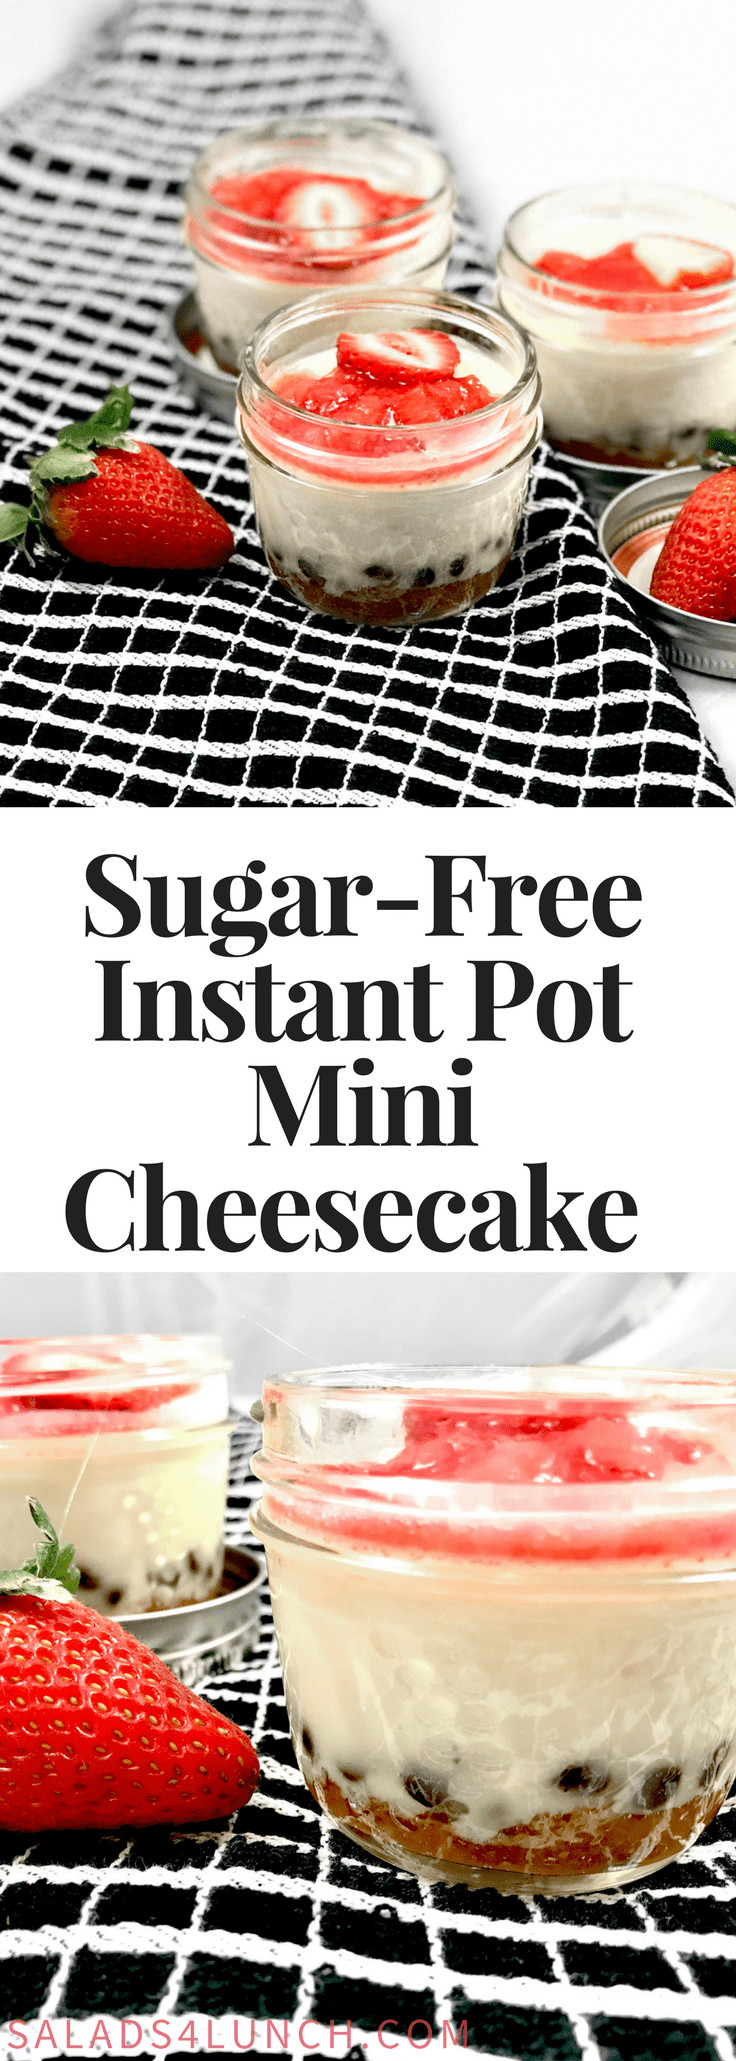 Diabetic Instant Pot Recipes
 Easy Mini Sugar Free Strawberry Cheesecake in the Instant